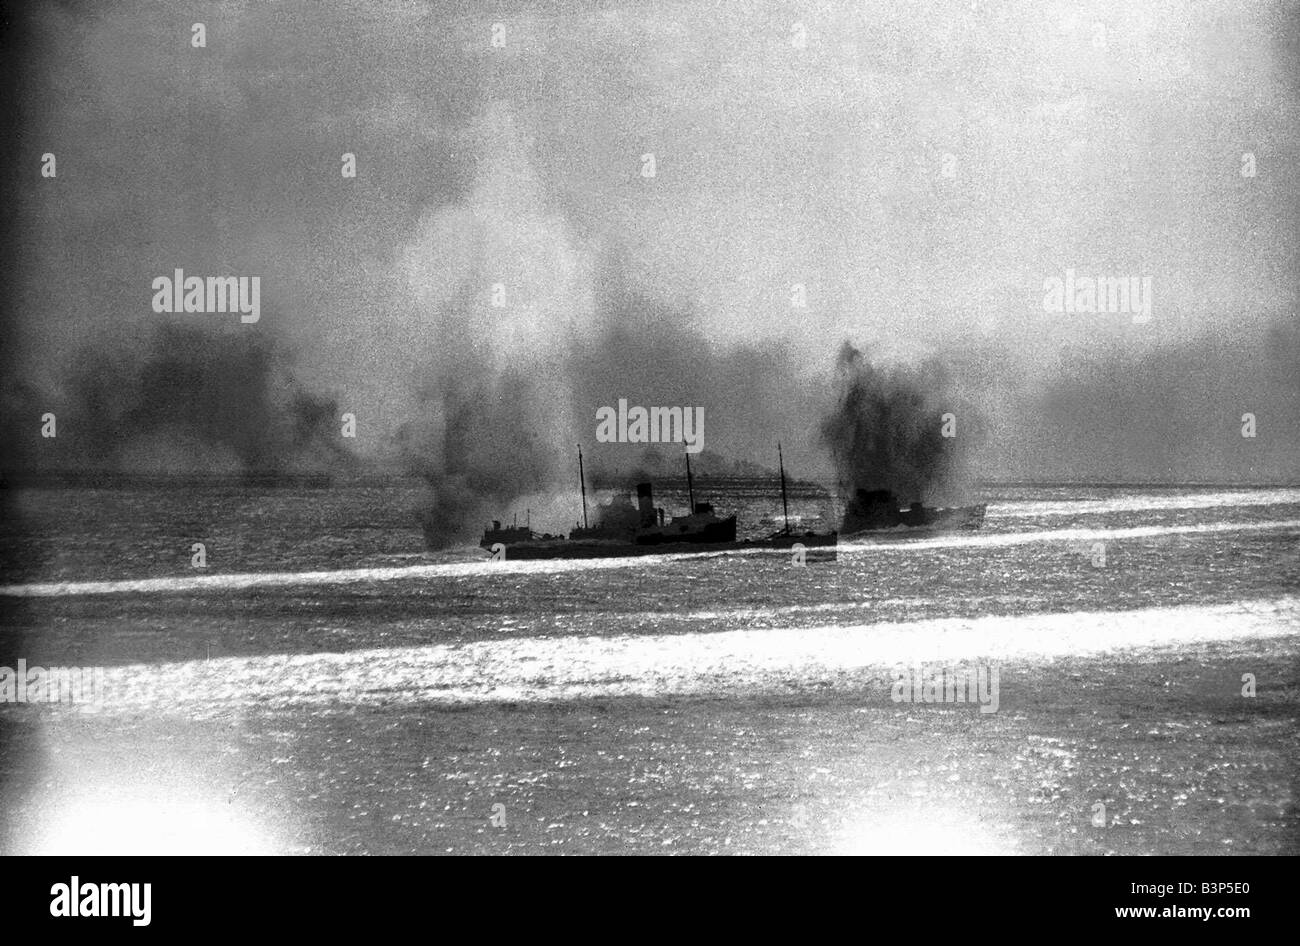 Convoy being bombed in the straits of Dover In 1940 the German Luftwaffe started to concentrate on aerial attacks on shipping in the English Channel The plan of the man in charge Hermann Goering was to lure British planes into dog fights with German Messerschmitts Goering projected that although the RAF had 1 500 aicraft they did not have enough pilots He also felt it more likely thata plane shot down over the channel would inevitably mean the loss of the pilot Stock Photo